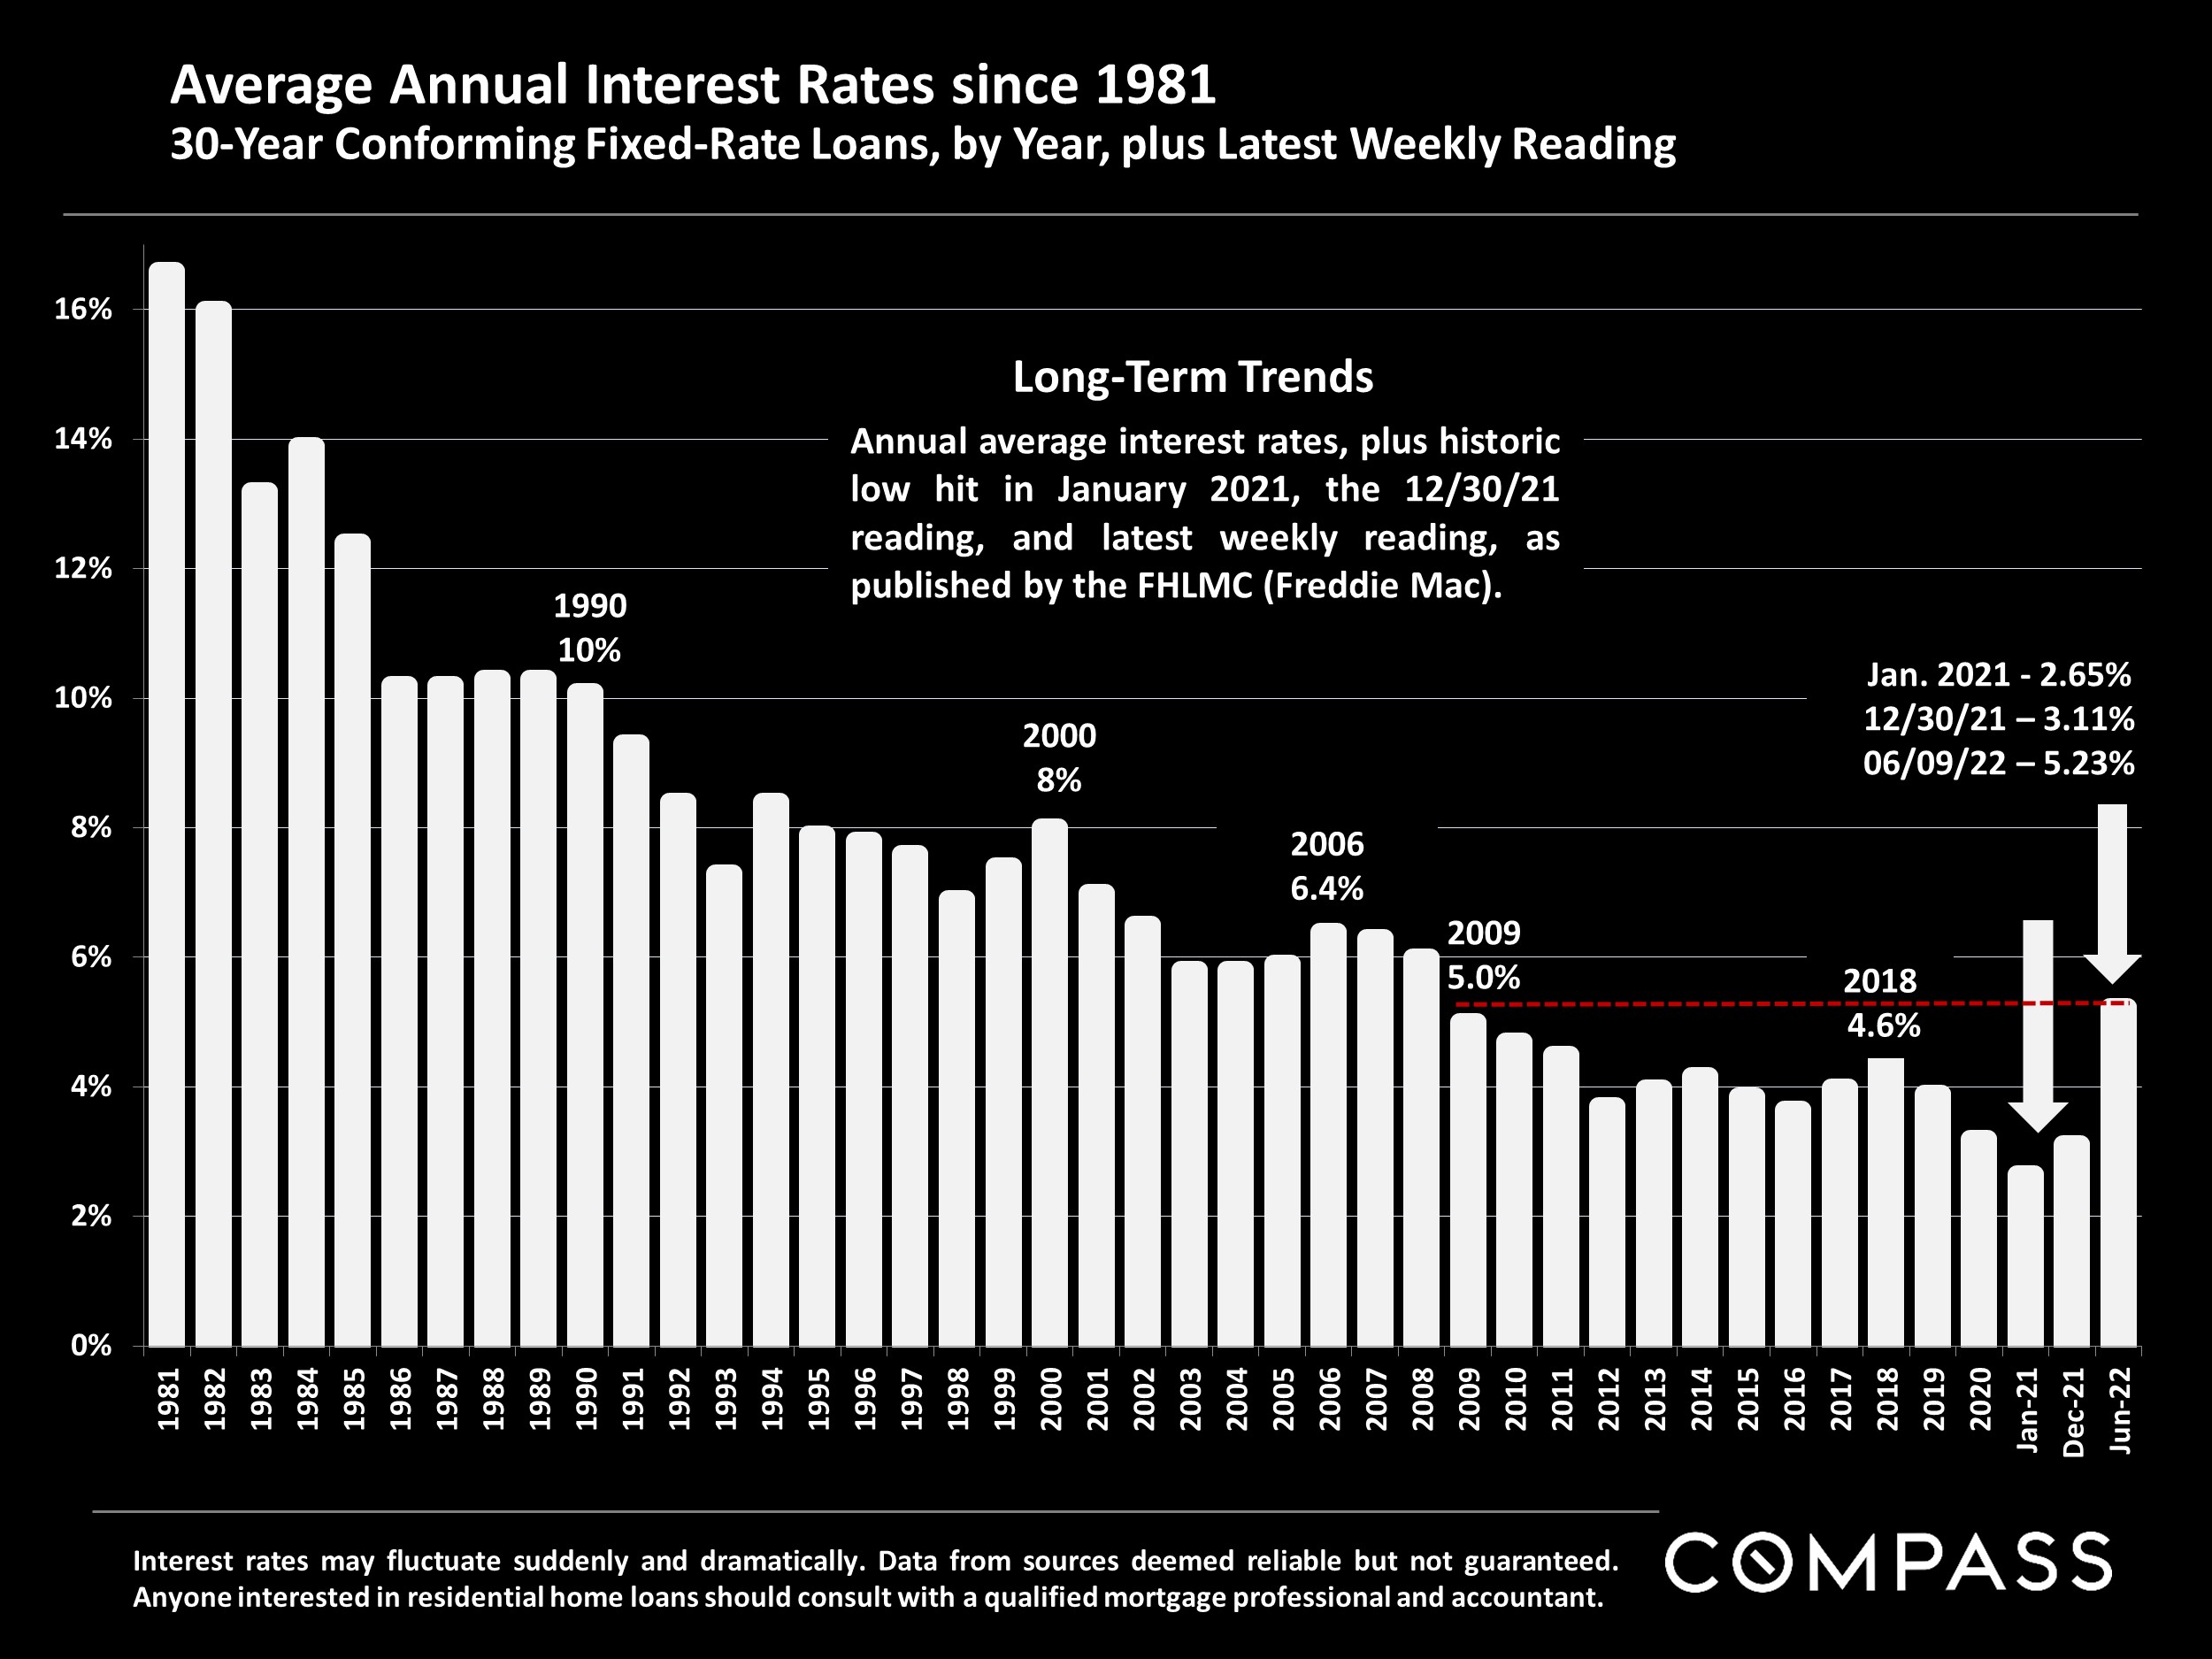 Slide showing the Average Annual Interest Rates since 1981